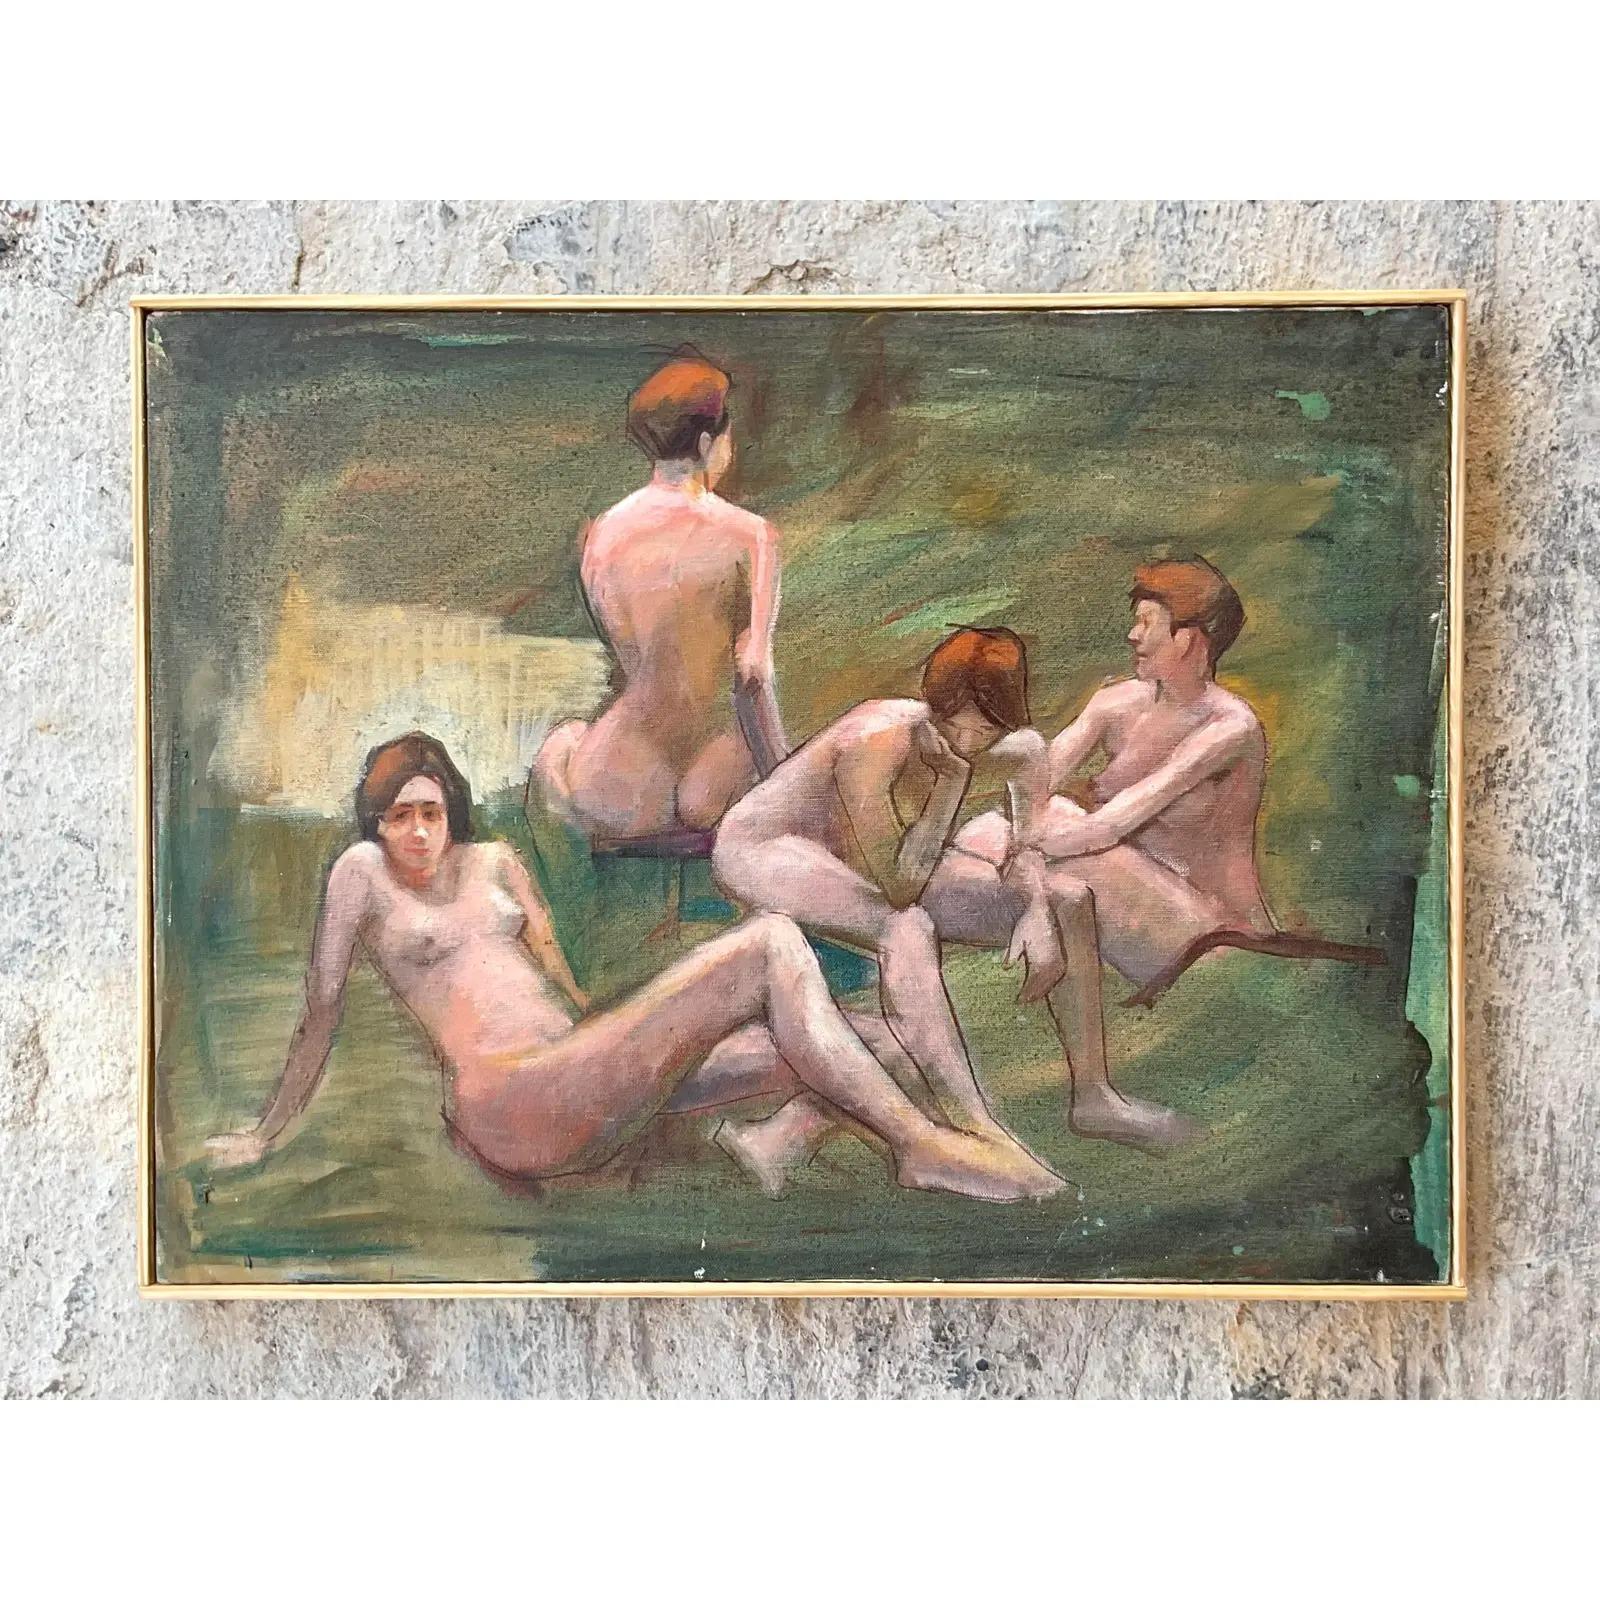 Fantastic vintage Boho original oil on canvas. A gorgeous study of the female nude in brilliant colors. Signed by the artist. Acquired from a Palm Beach estate.